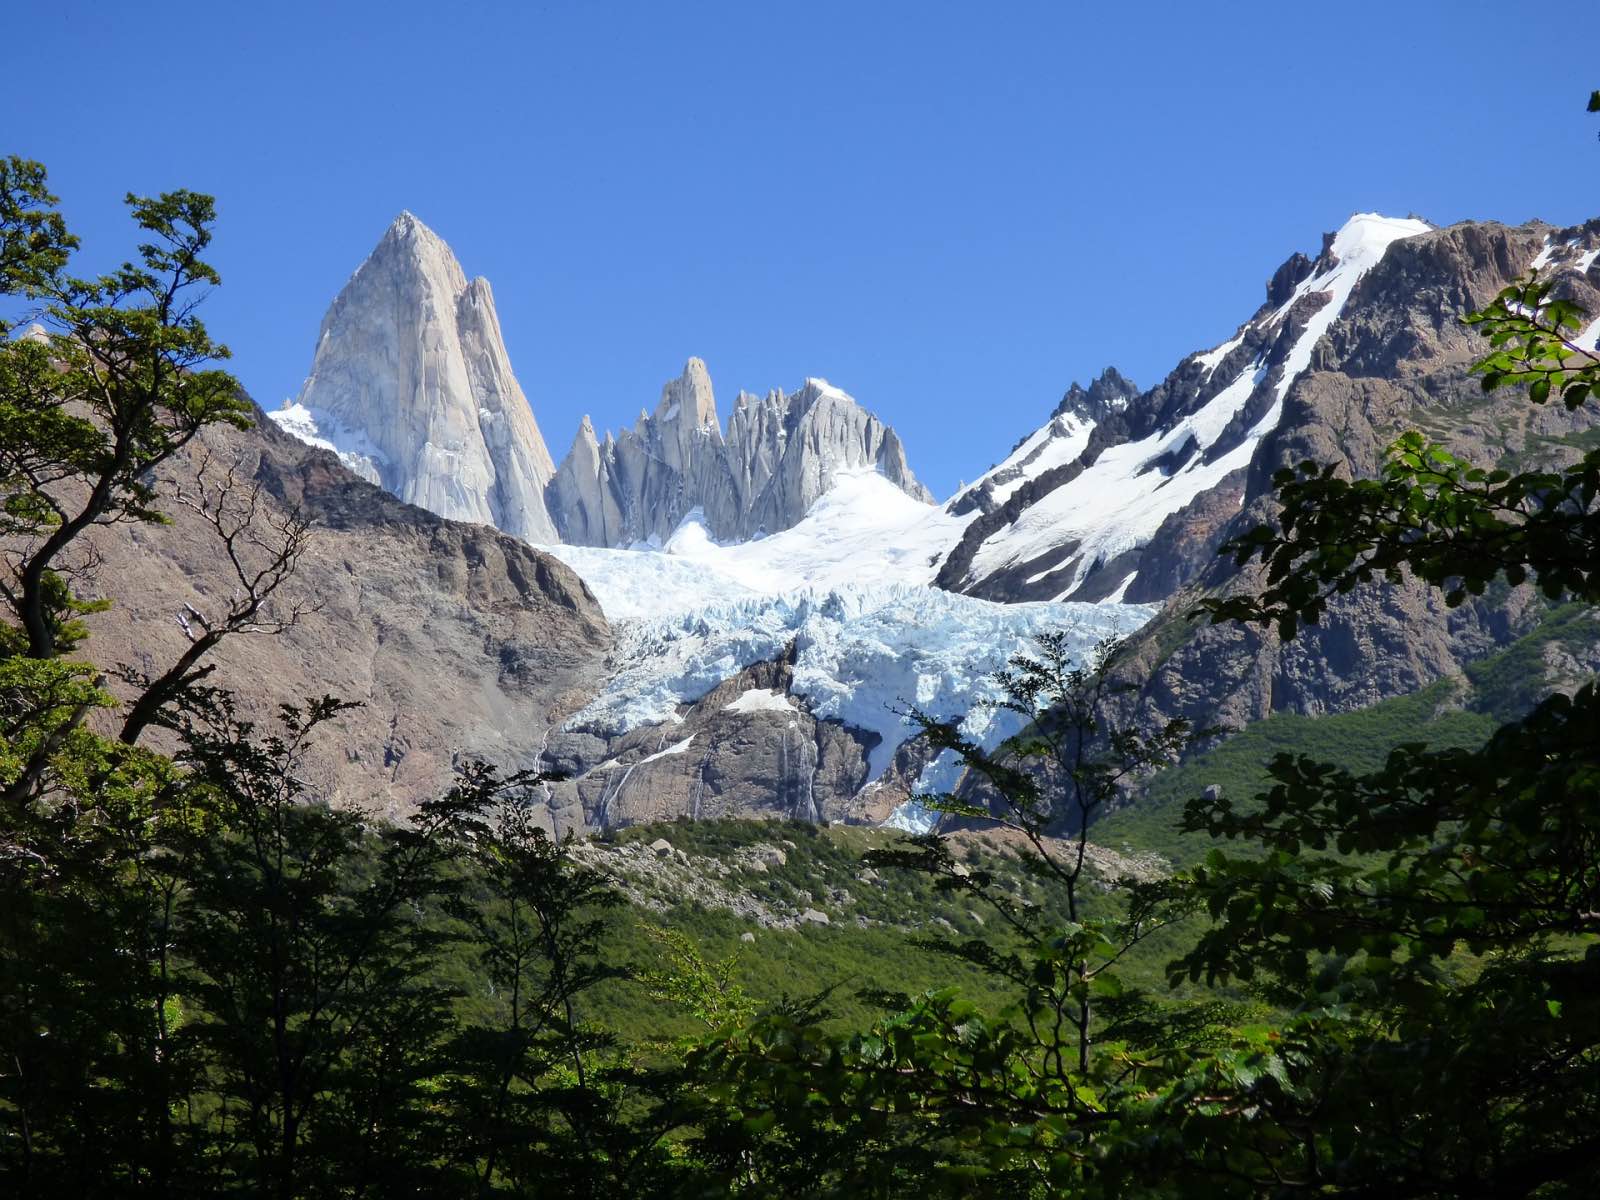 Hiking to the base of Cerro Fitz Roy, an icon of Patagonia Argentina.